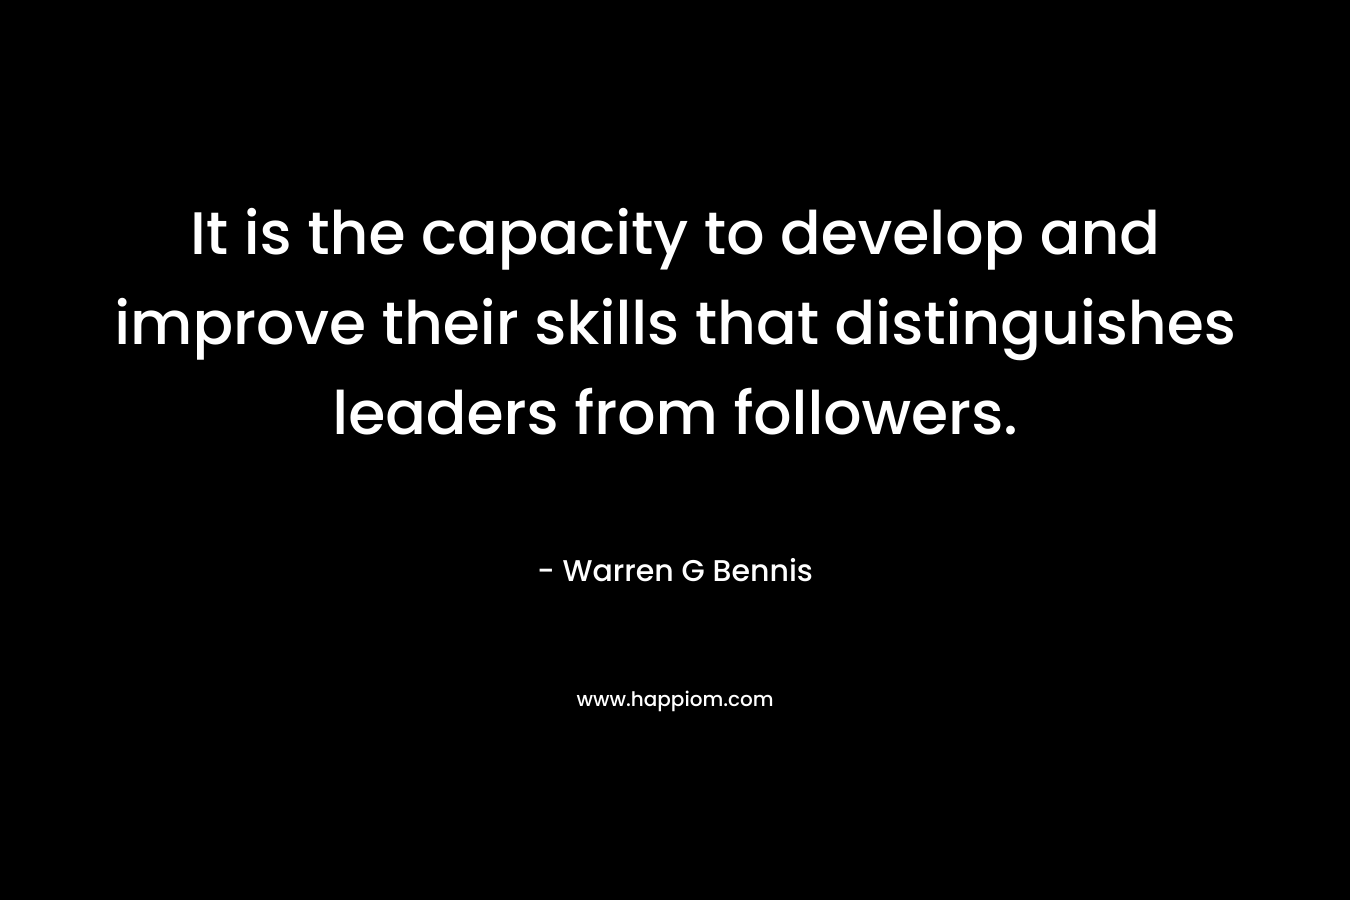 It is the capacity to develop and improve their skills that distinguishes leaders from followers.